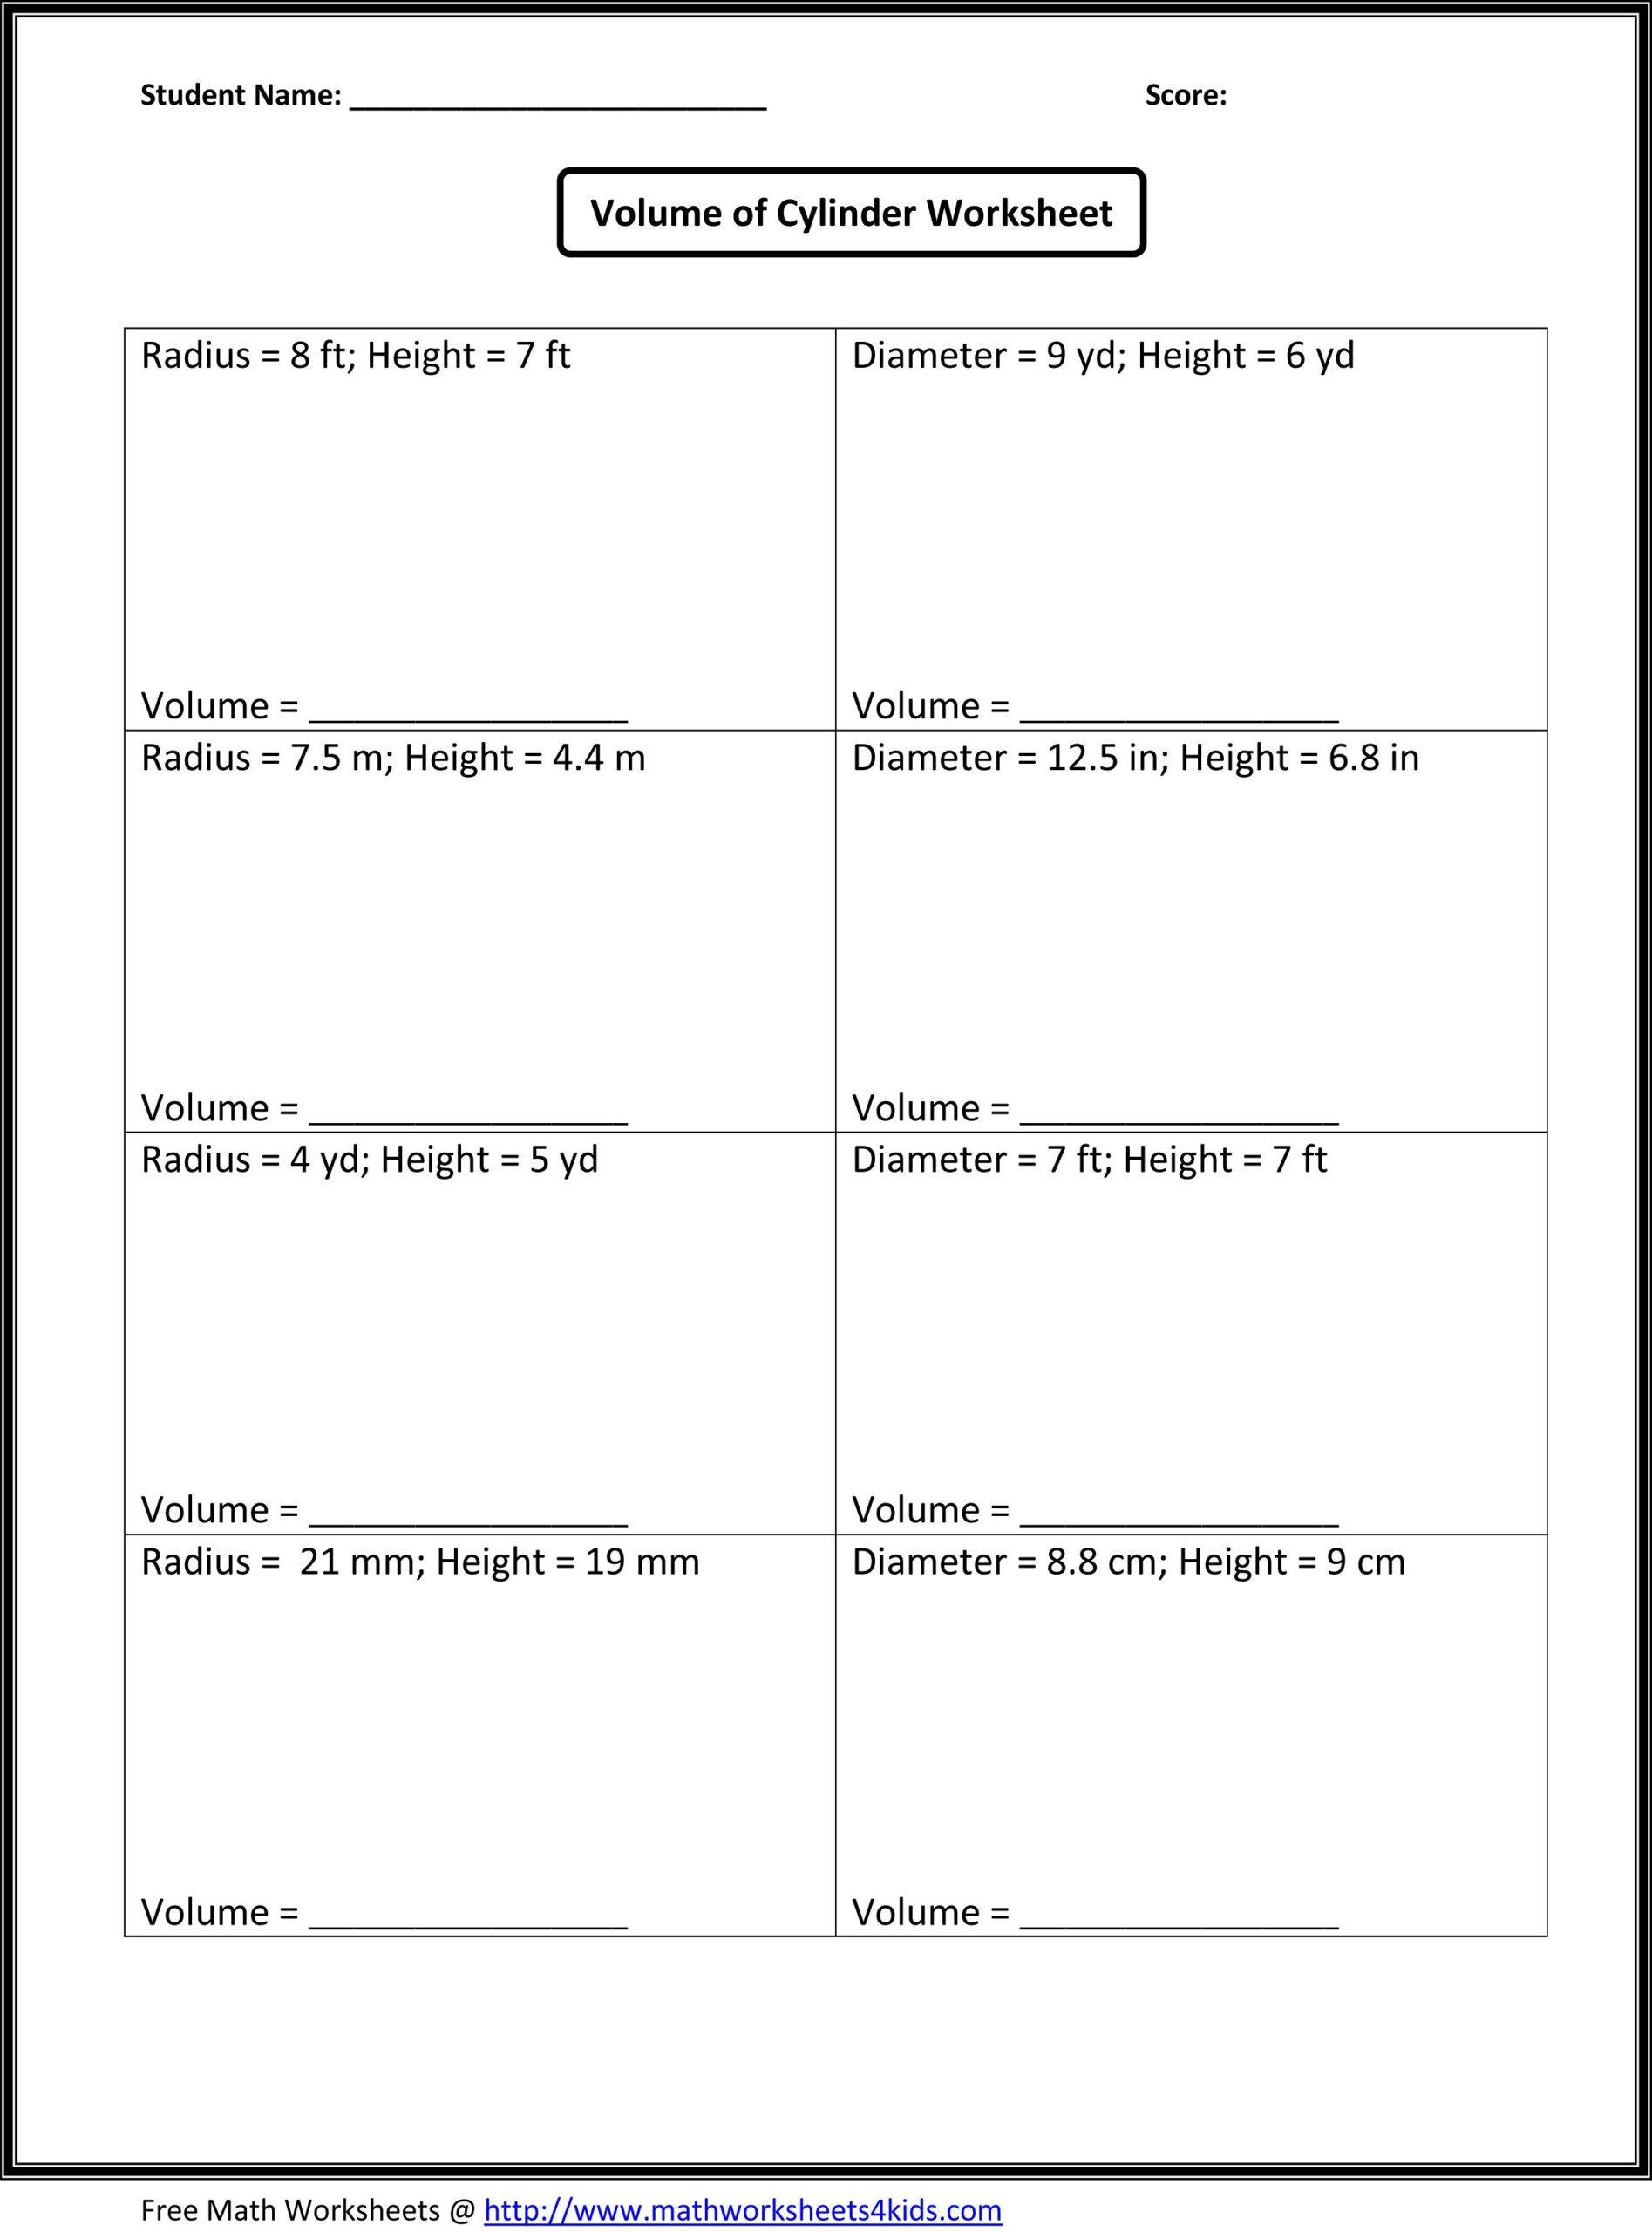 Calculator Practice Worksheets 8Th Grade Math - Google within Multiplication Worksheets 8Th